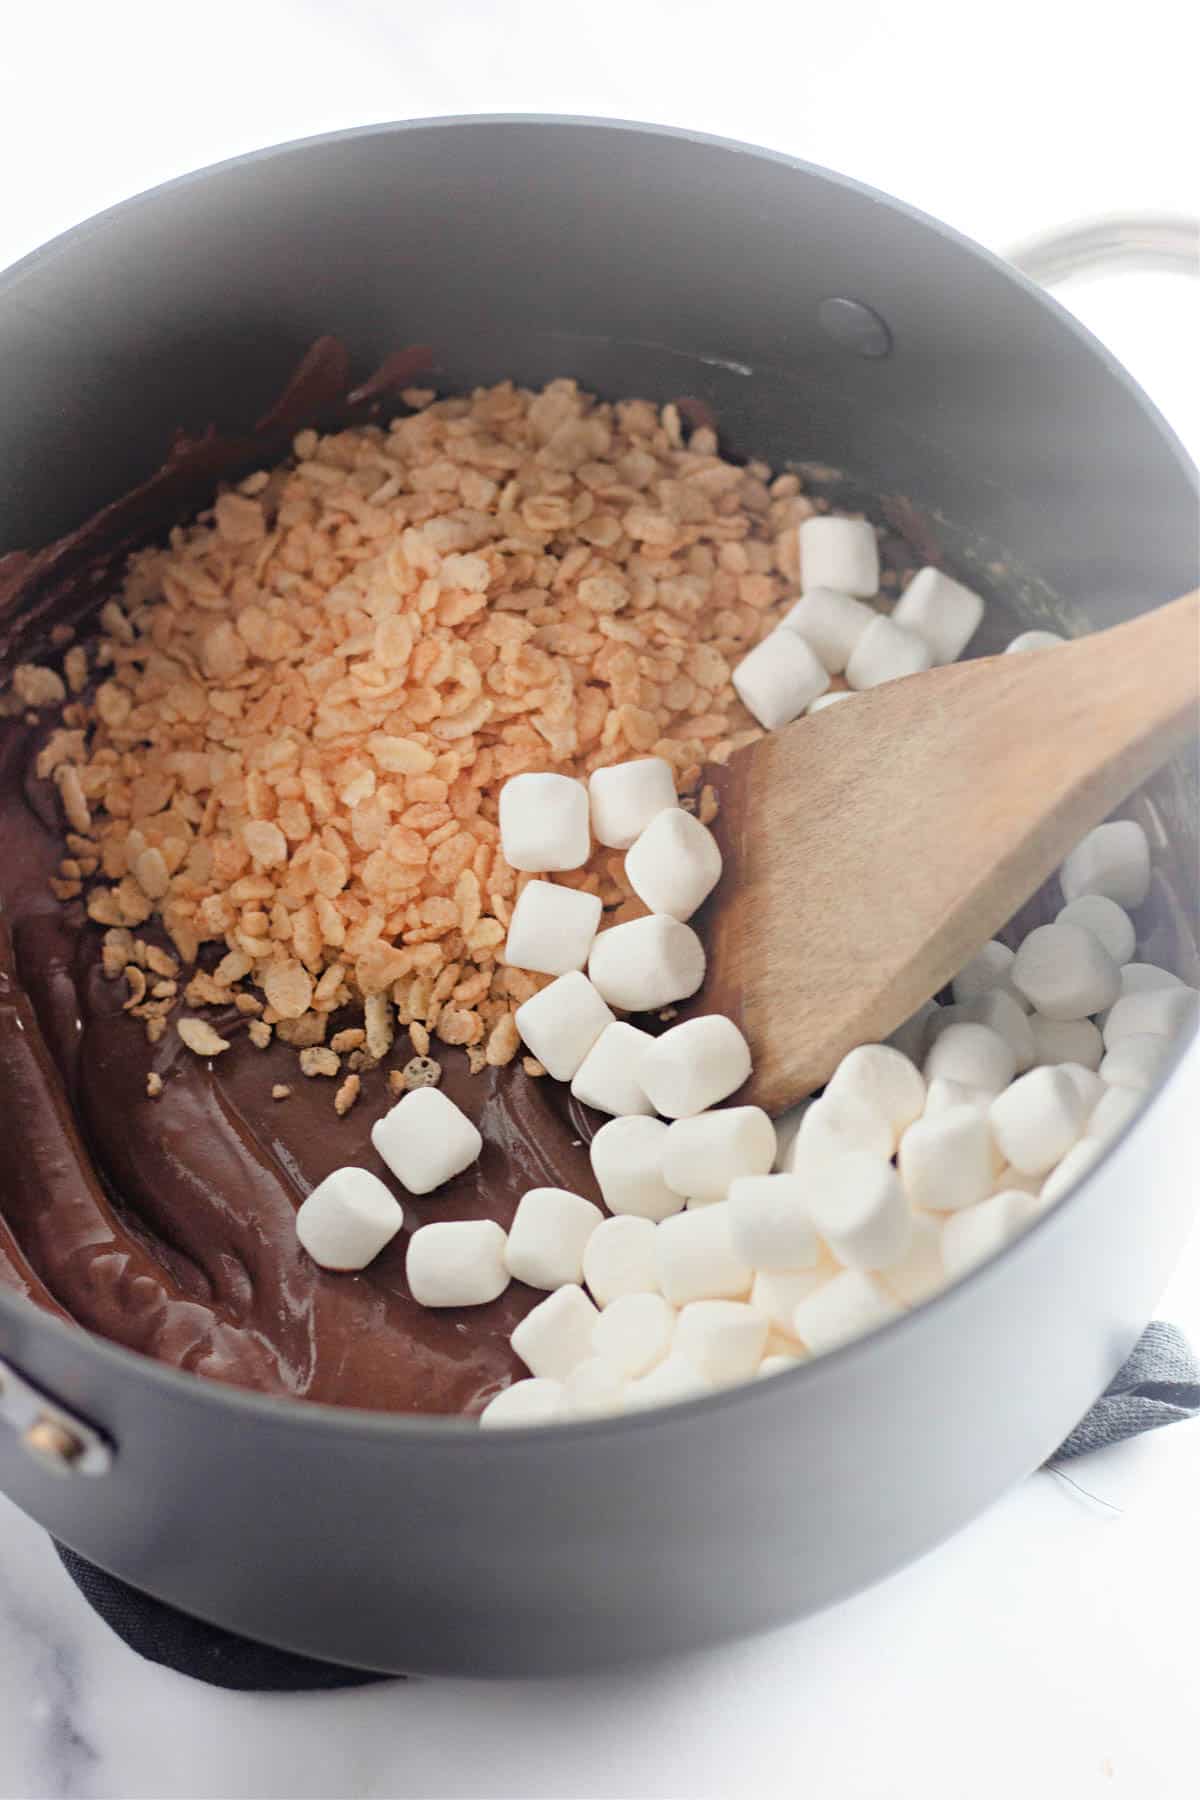 Melted chocolate, rice krispys, and marshmallows in a saucepan.